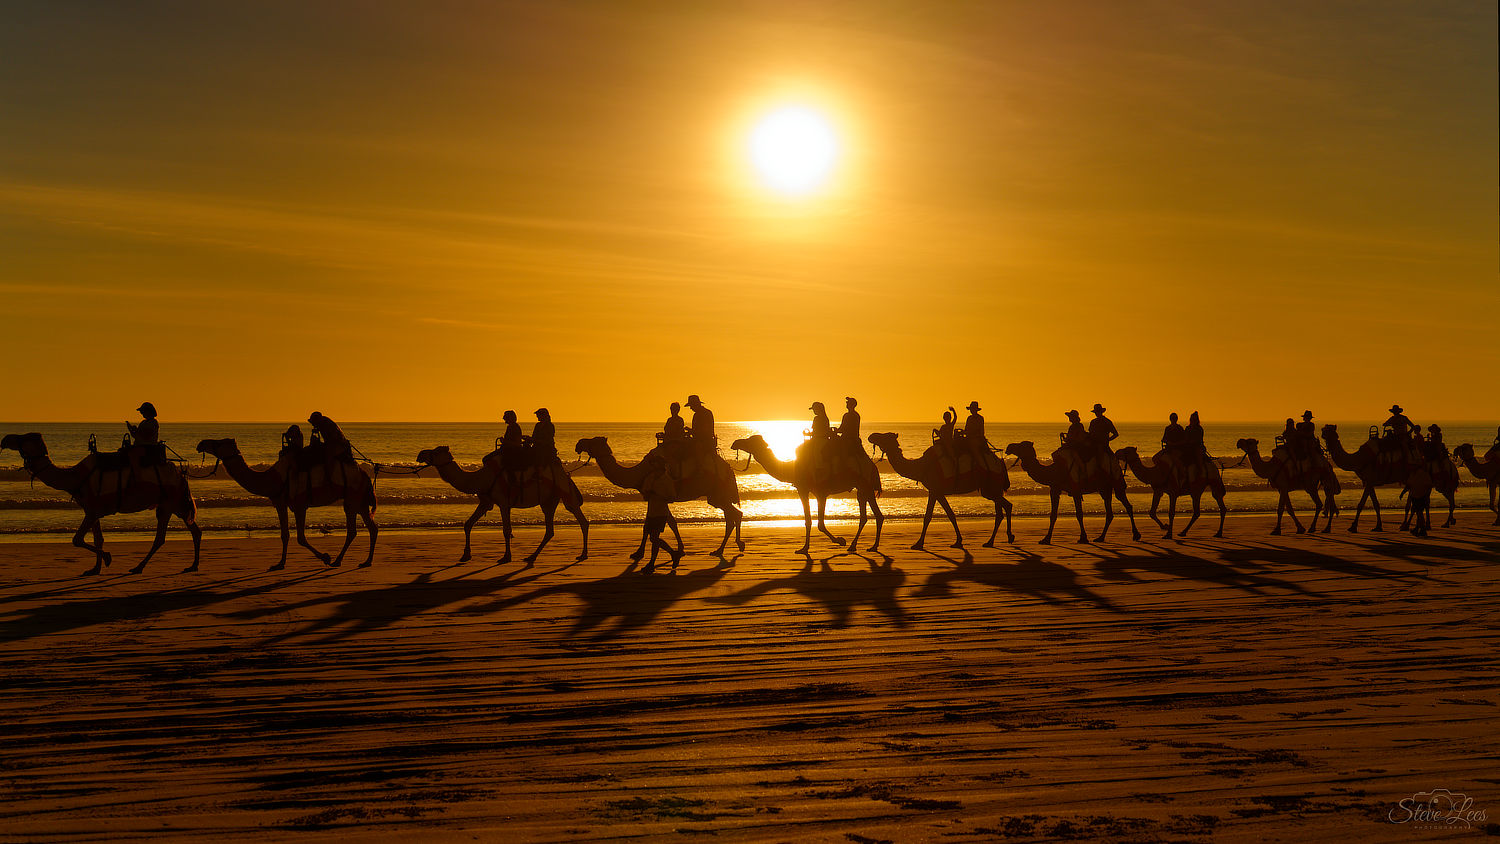 Cable Beach Camel Ride